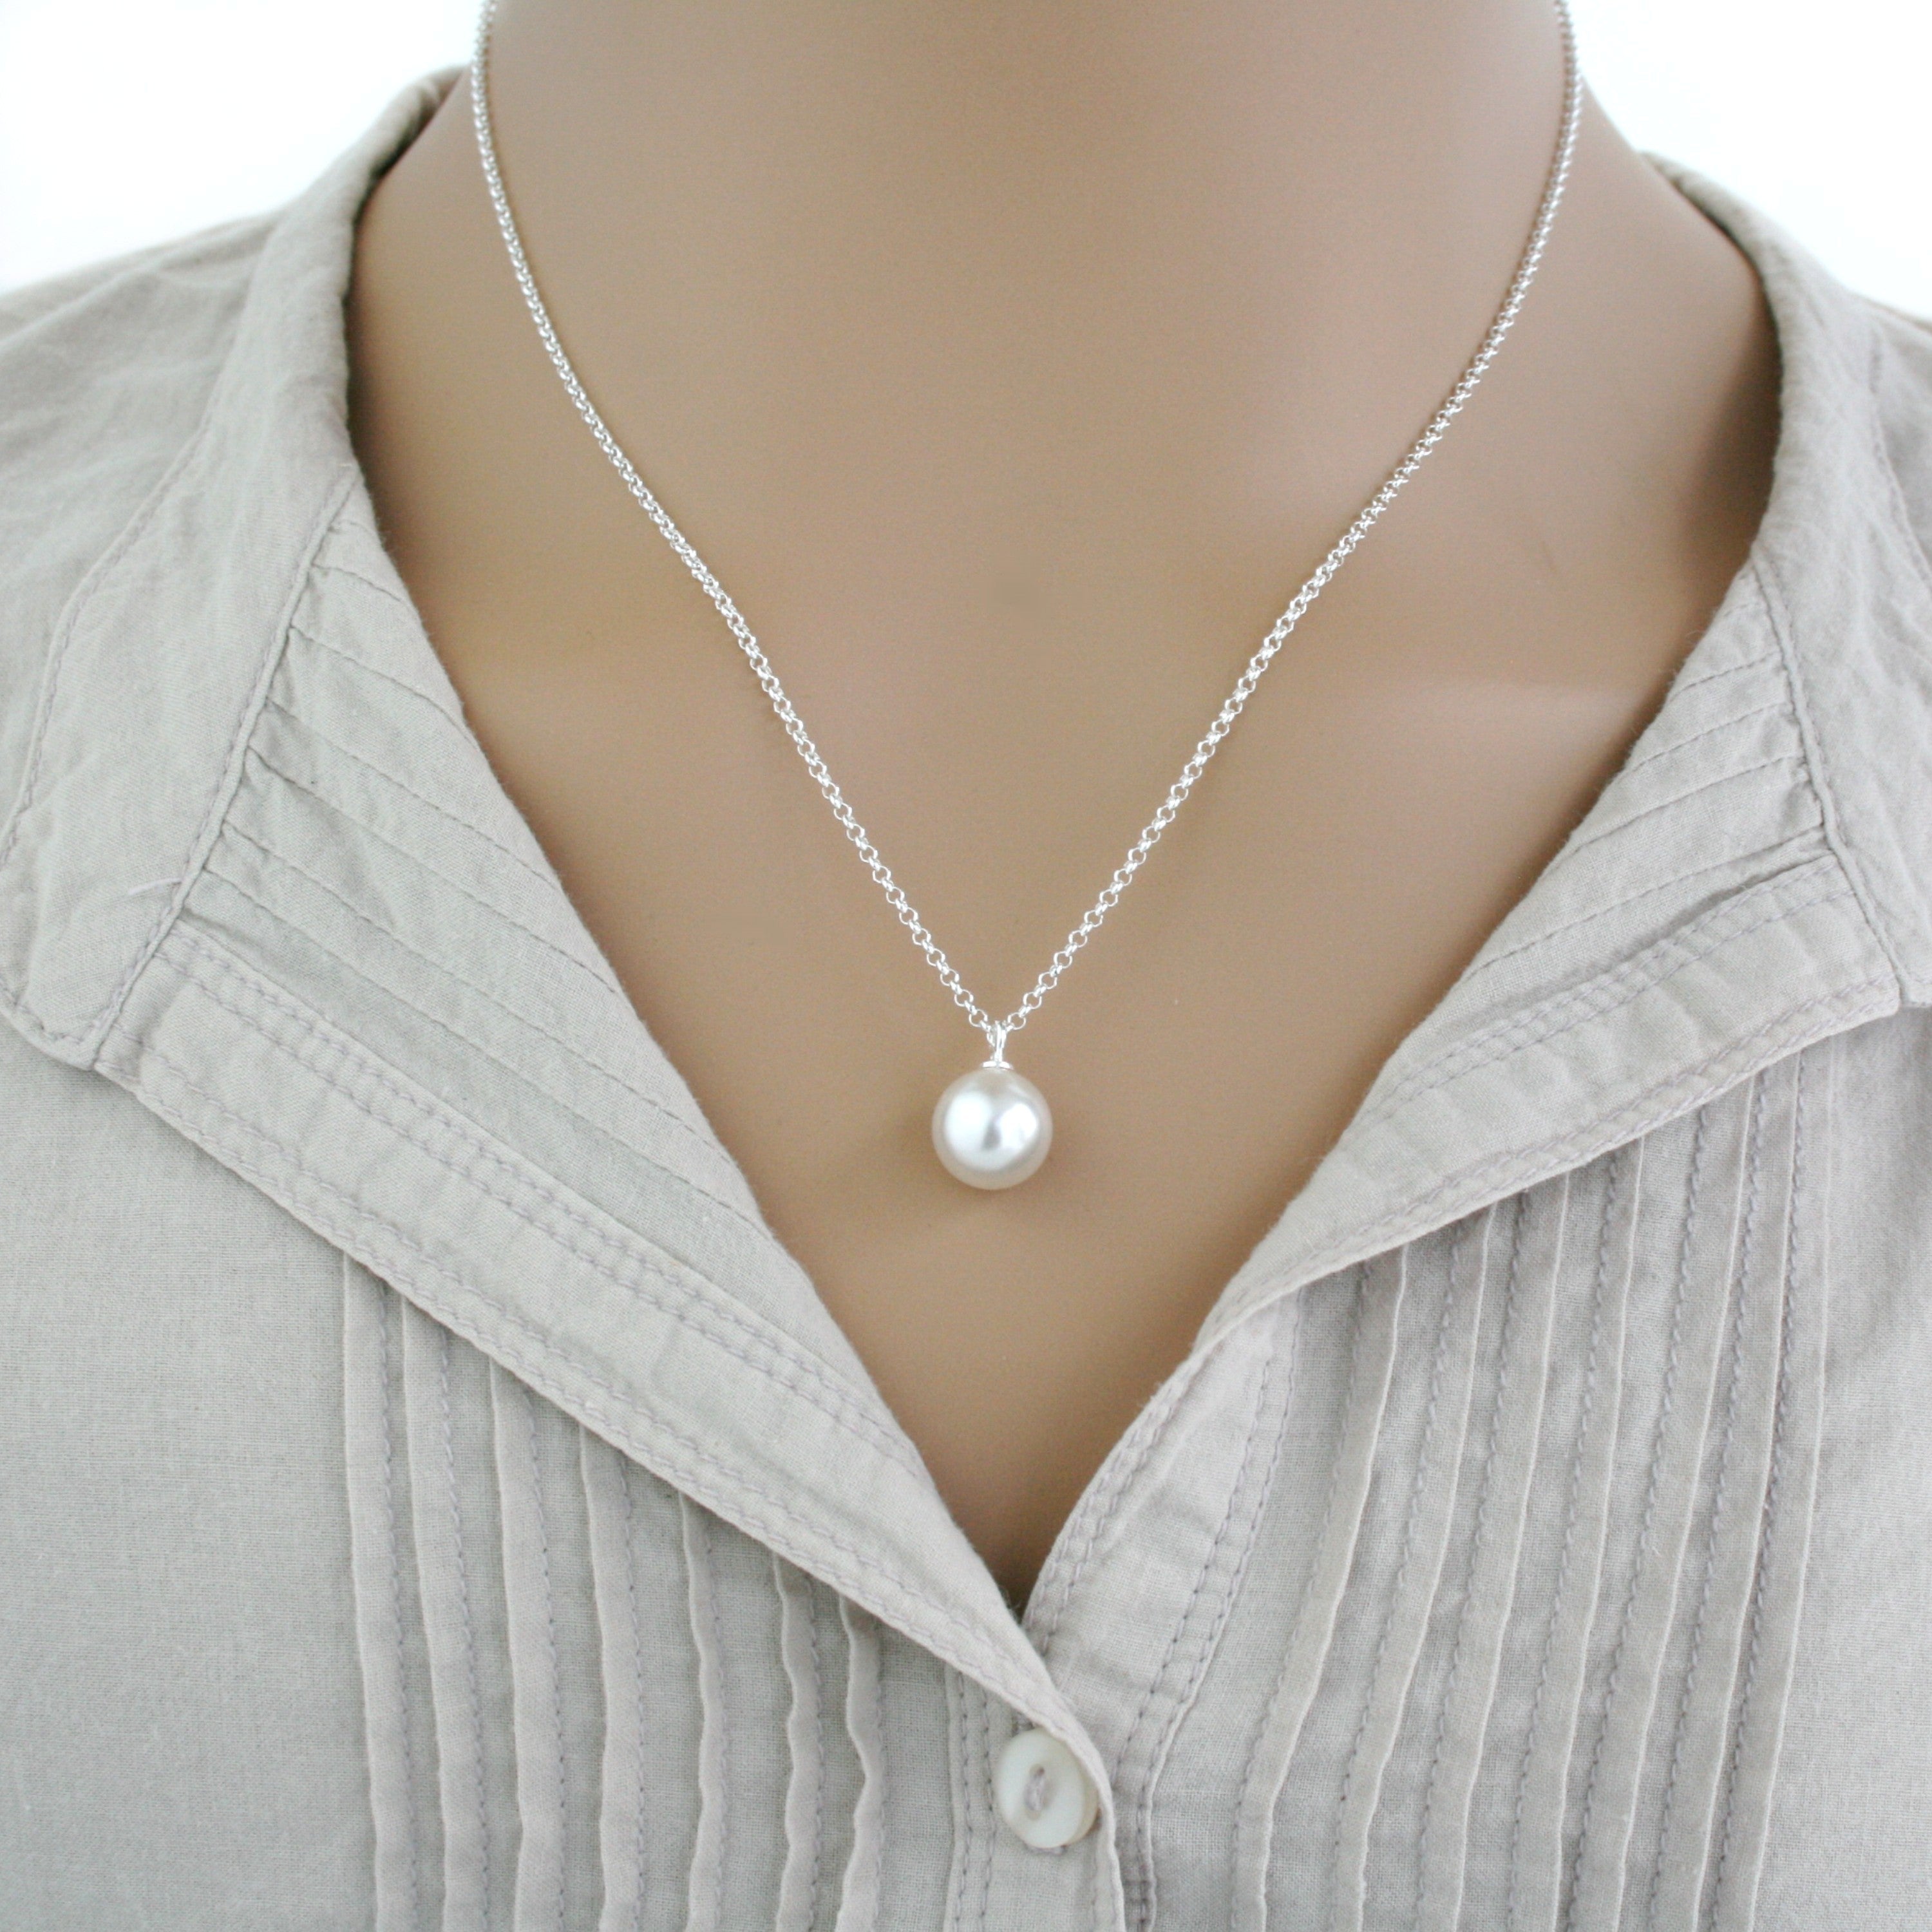 Sterling Silver Faux Pearl Pendant & Chain